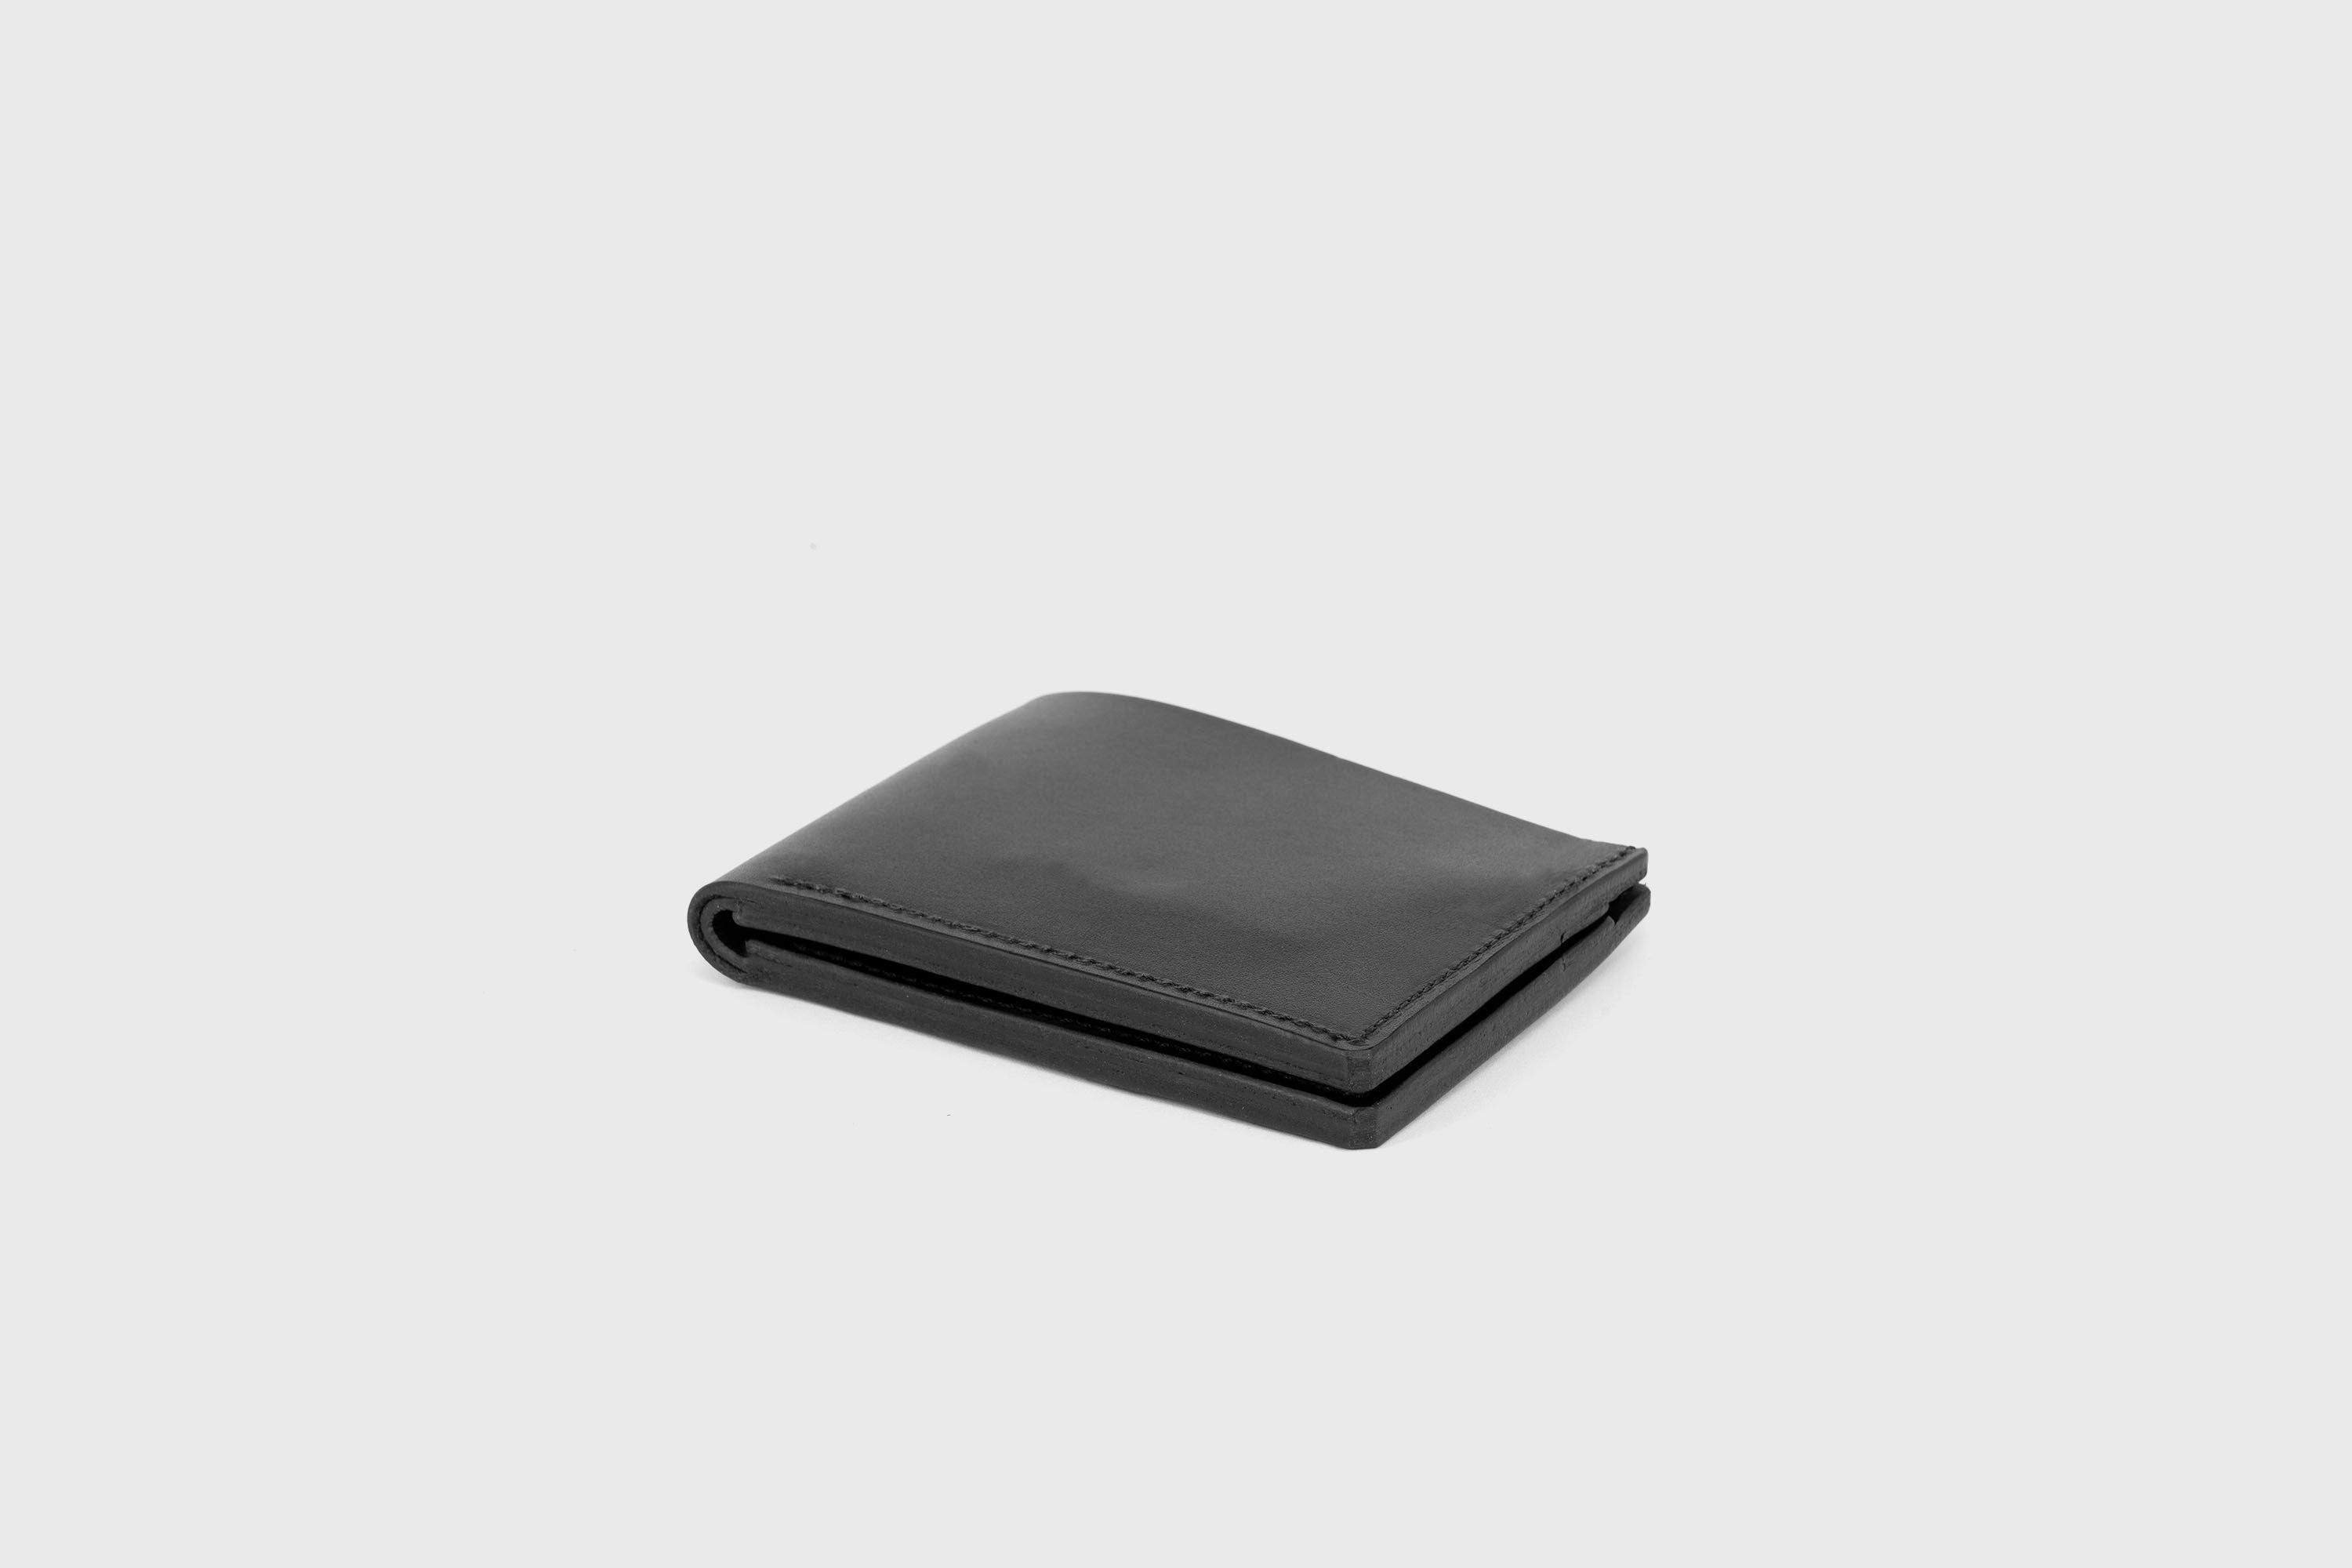 Bifold Wallet Black Leather Vegetable Tanned Leather Premium Classic Design and Handcrafted By Atelier Madre Manuel Dreeesmann Barcelona Spain